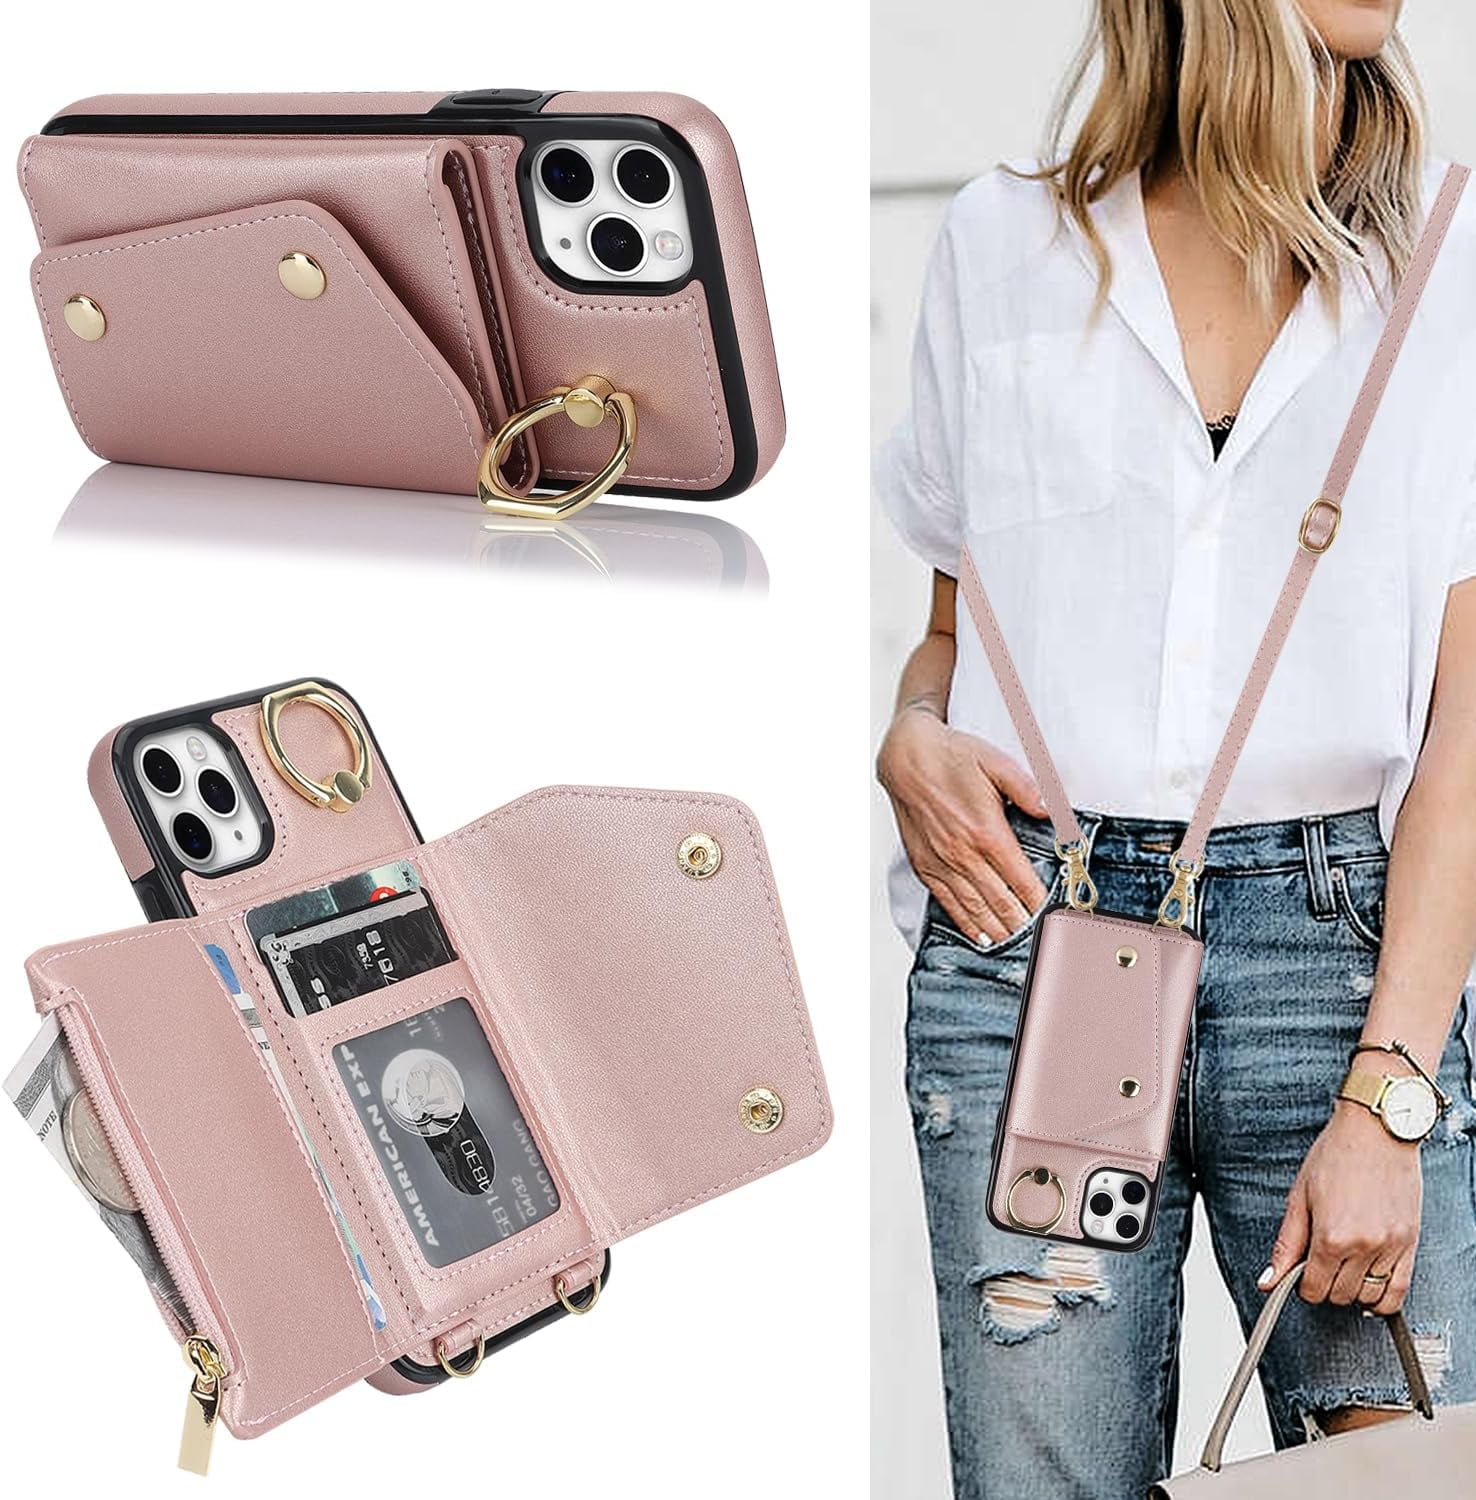 for iPhone 11 Pro Max Case Wallet with Strap for Women,Crossbody Lanyard  and Wristlet Strap,Zipper Pocket,Credit Card Holder,Ring Stand,RFID  Blocking Phone Wallet Cases(6.5 inch,Pink) 